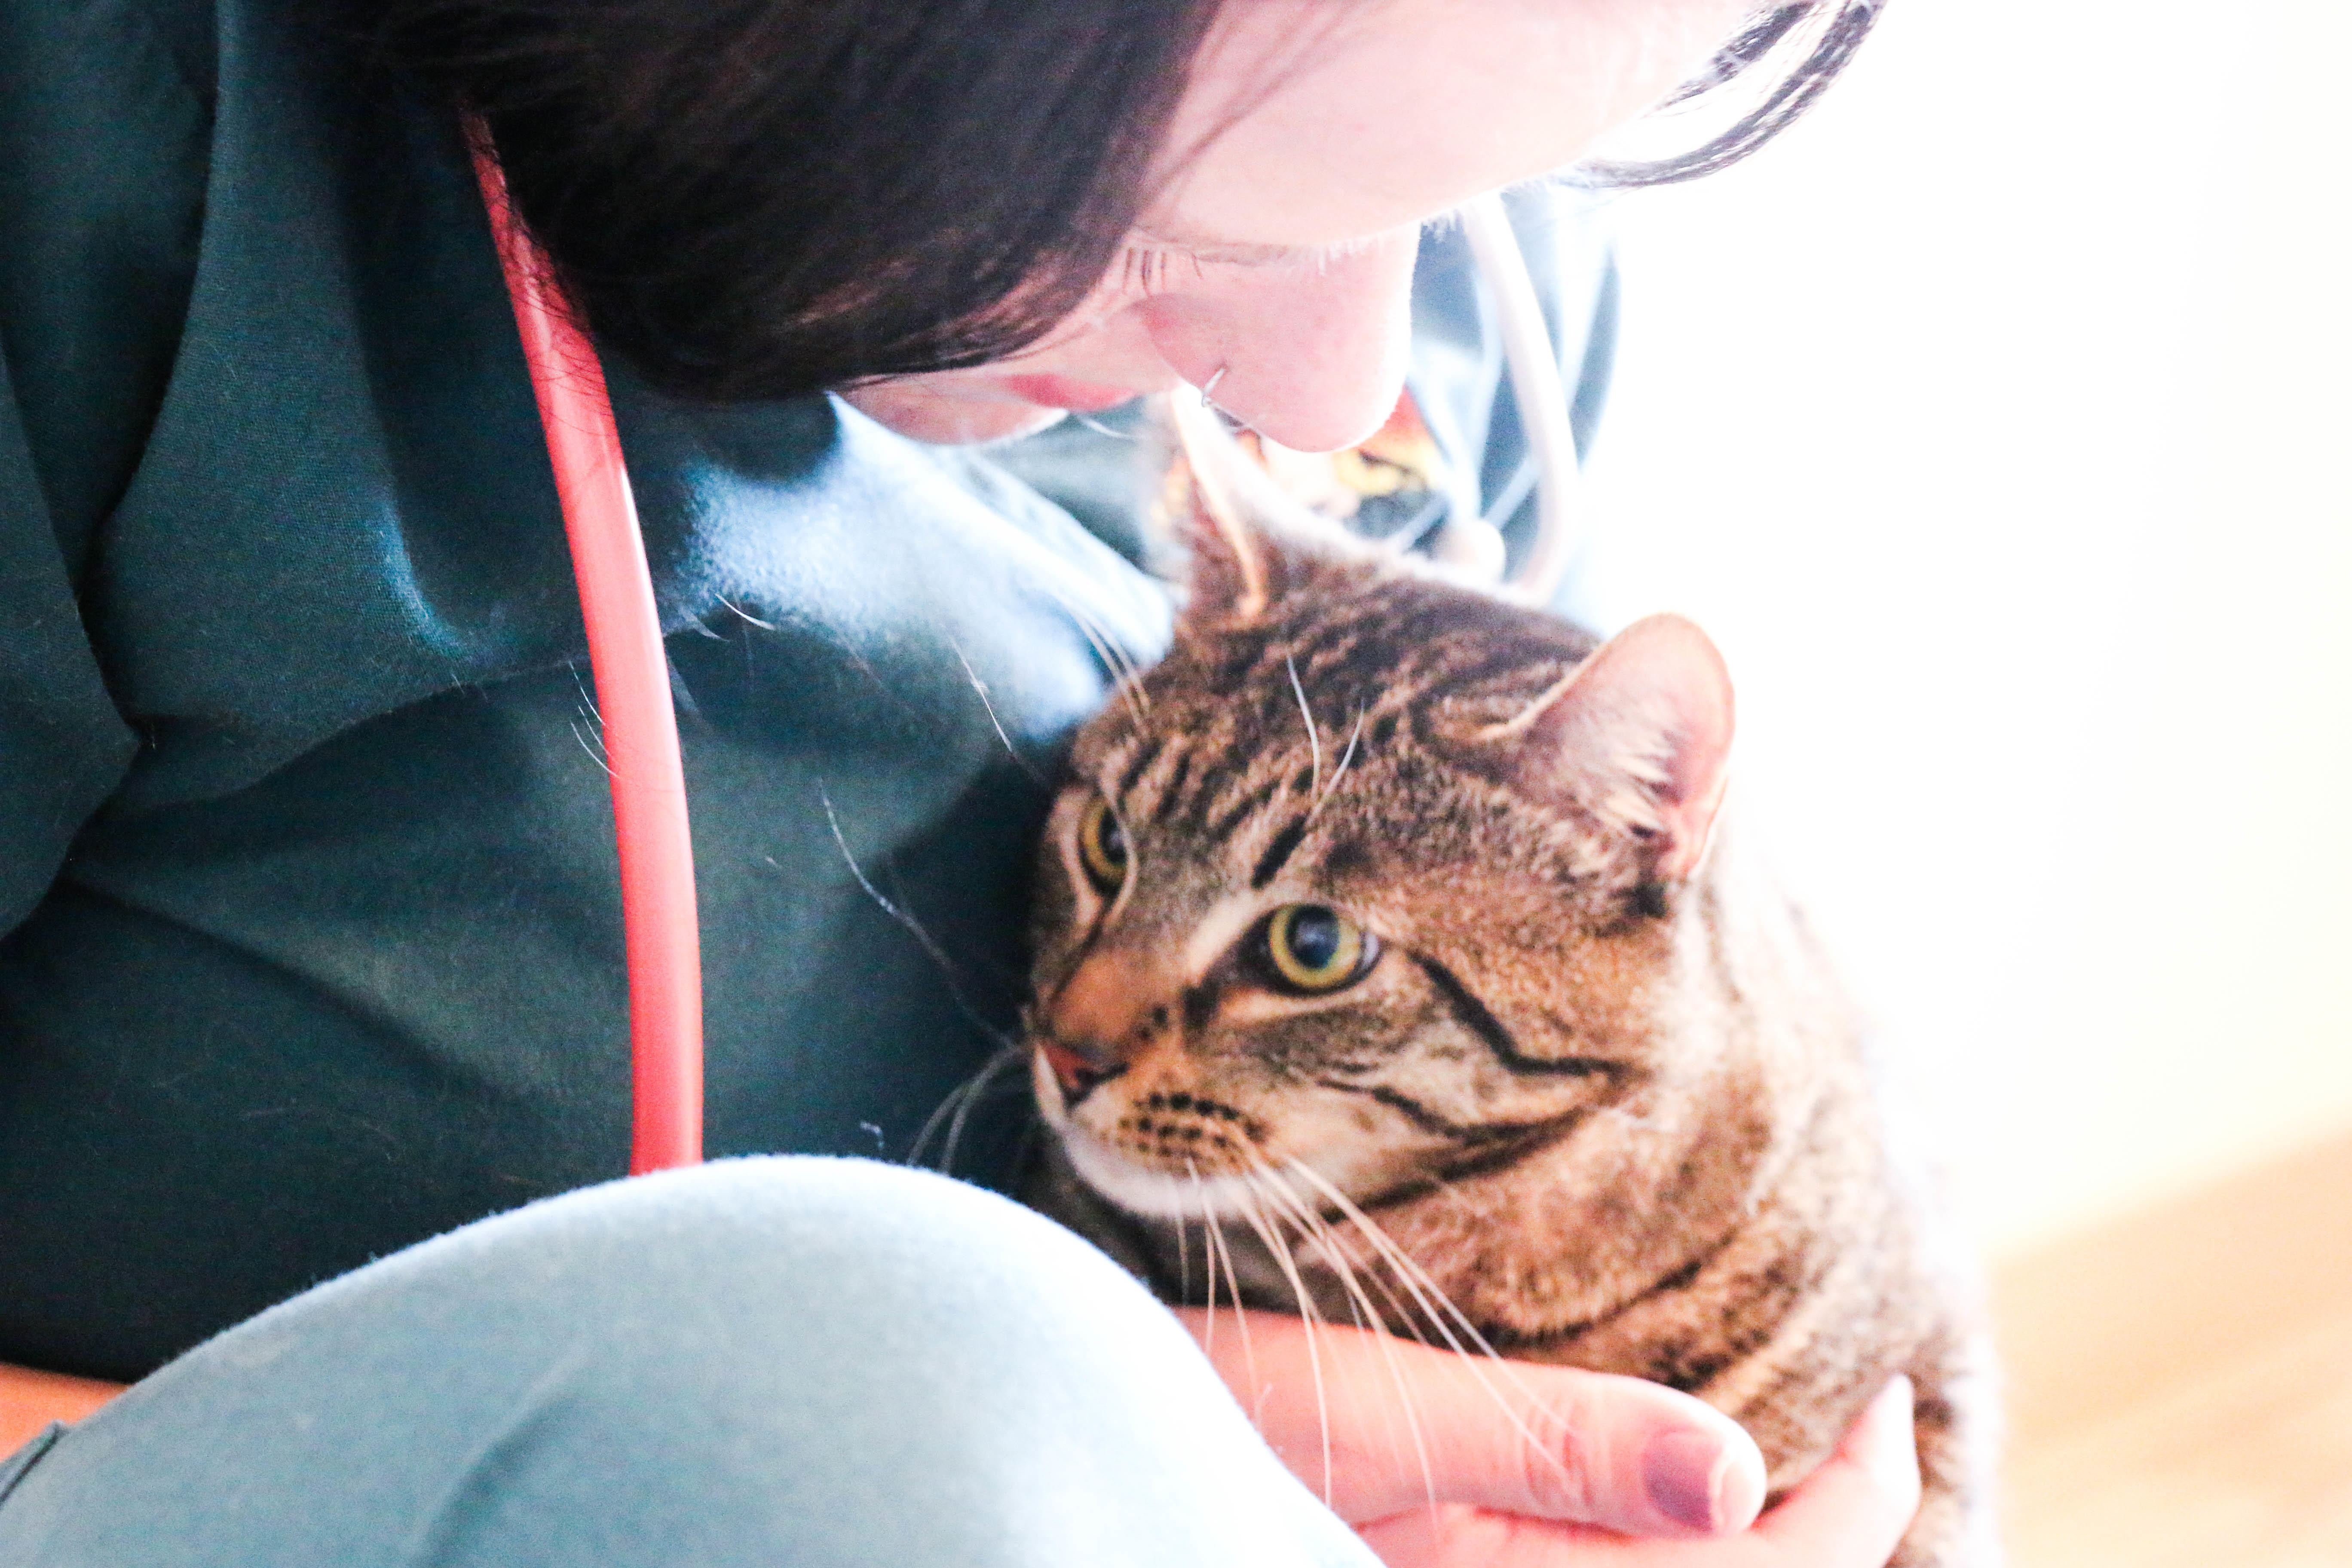 Dublin Veterinary Hospital treats patients with superior medical services and a lot of love!